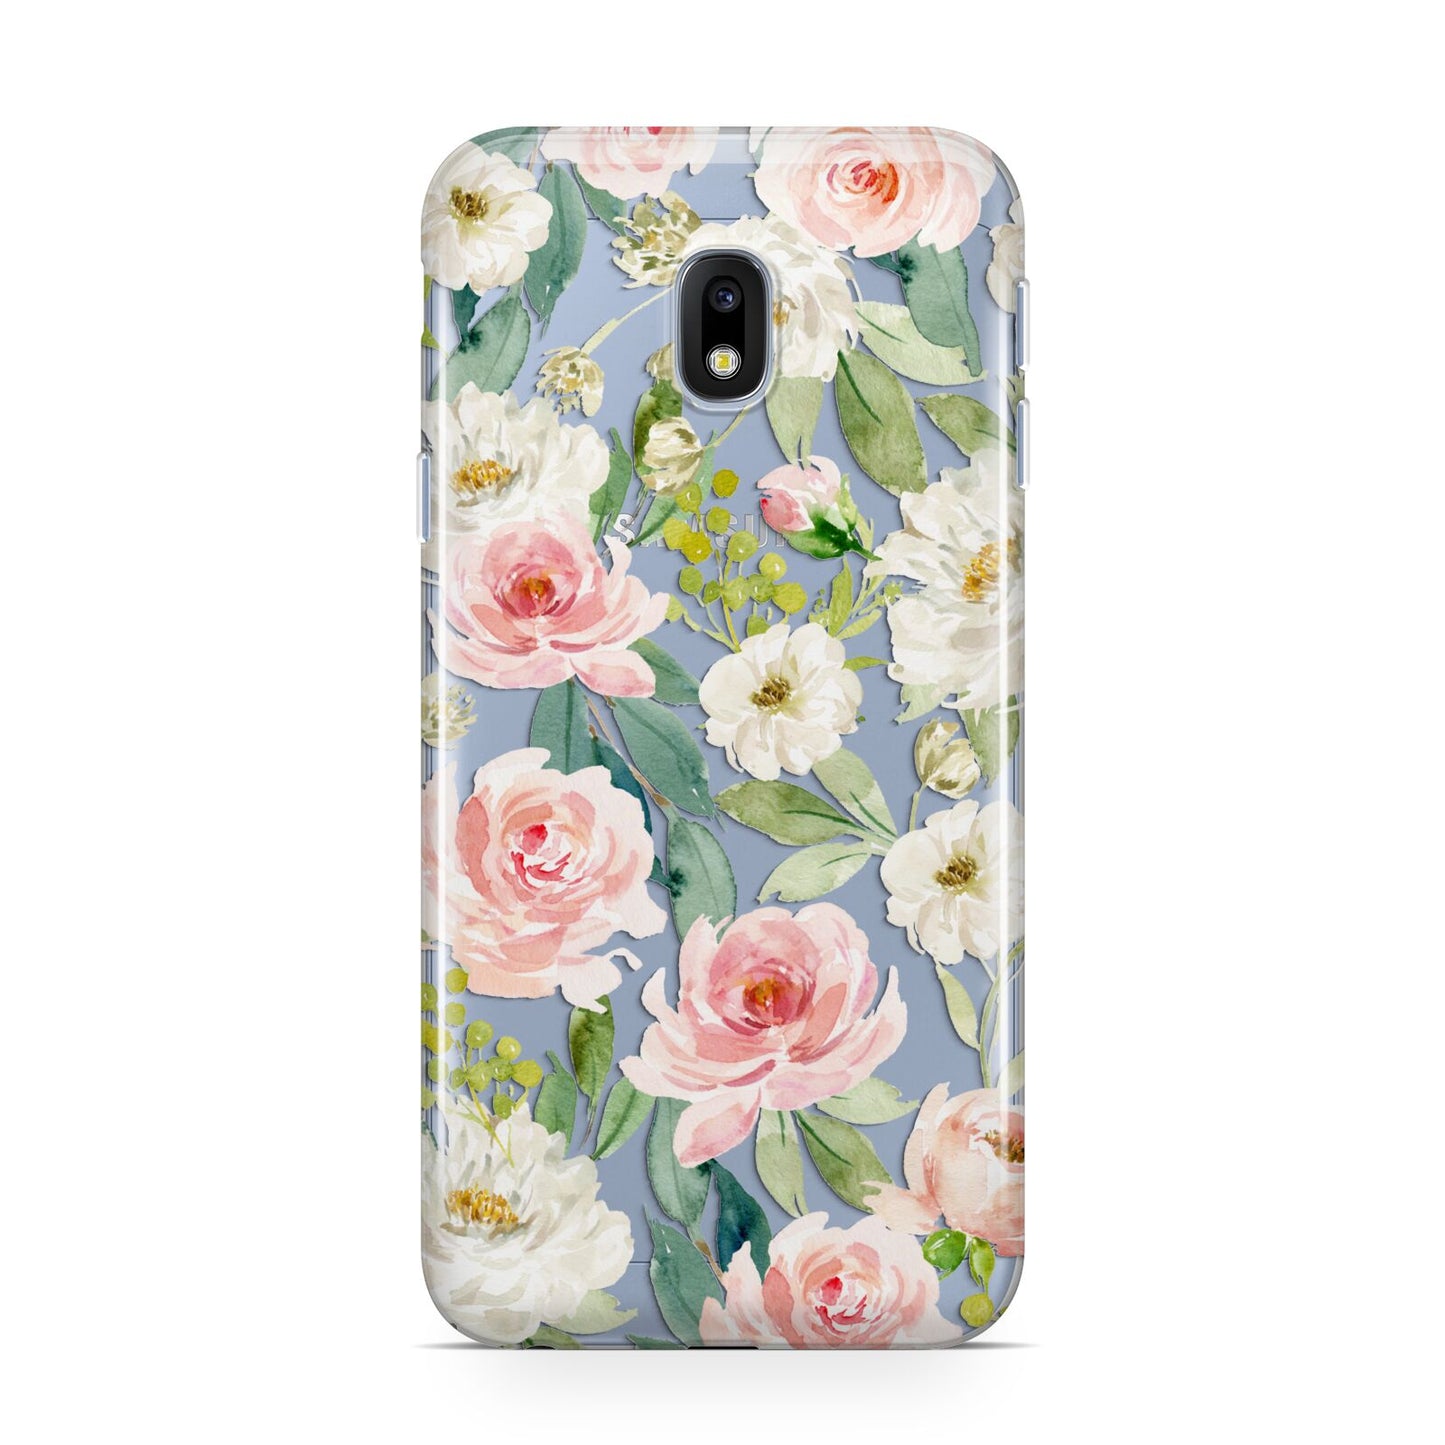 Watercolour Peonies Roses and Foliage Samsung Galaxy J3 2017 Case